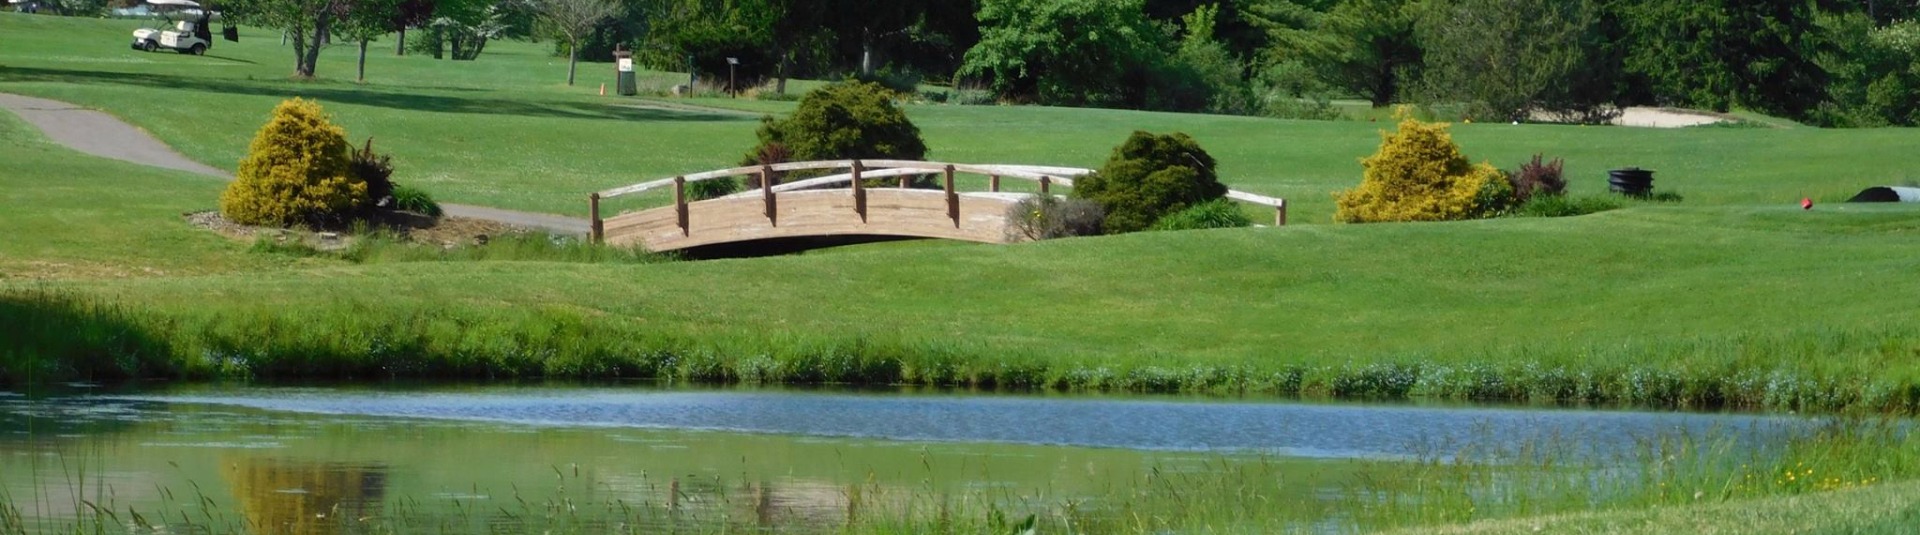 view of bridge on golf course green